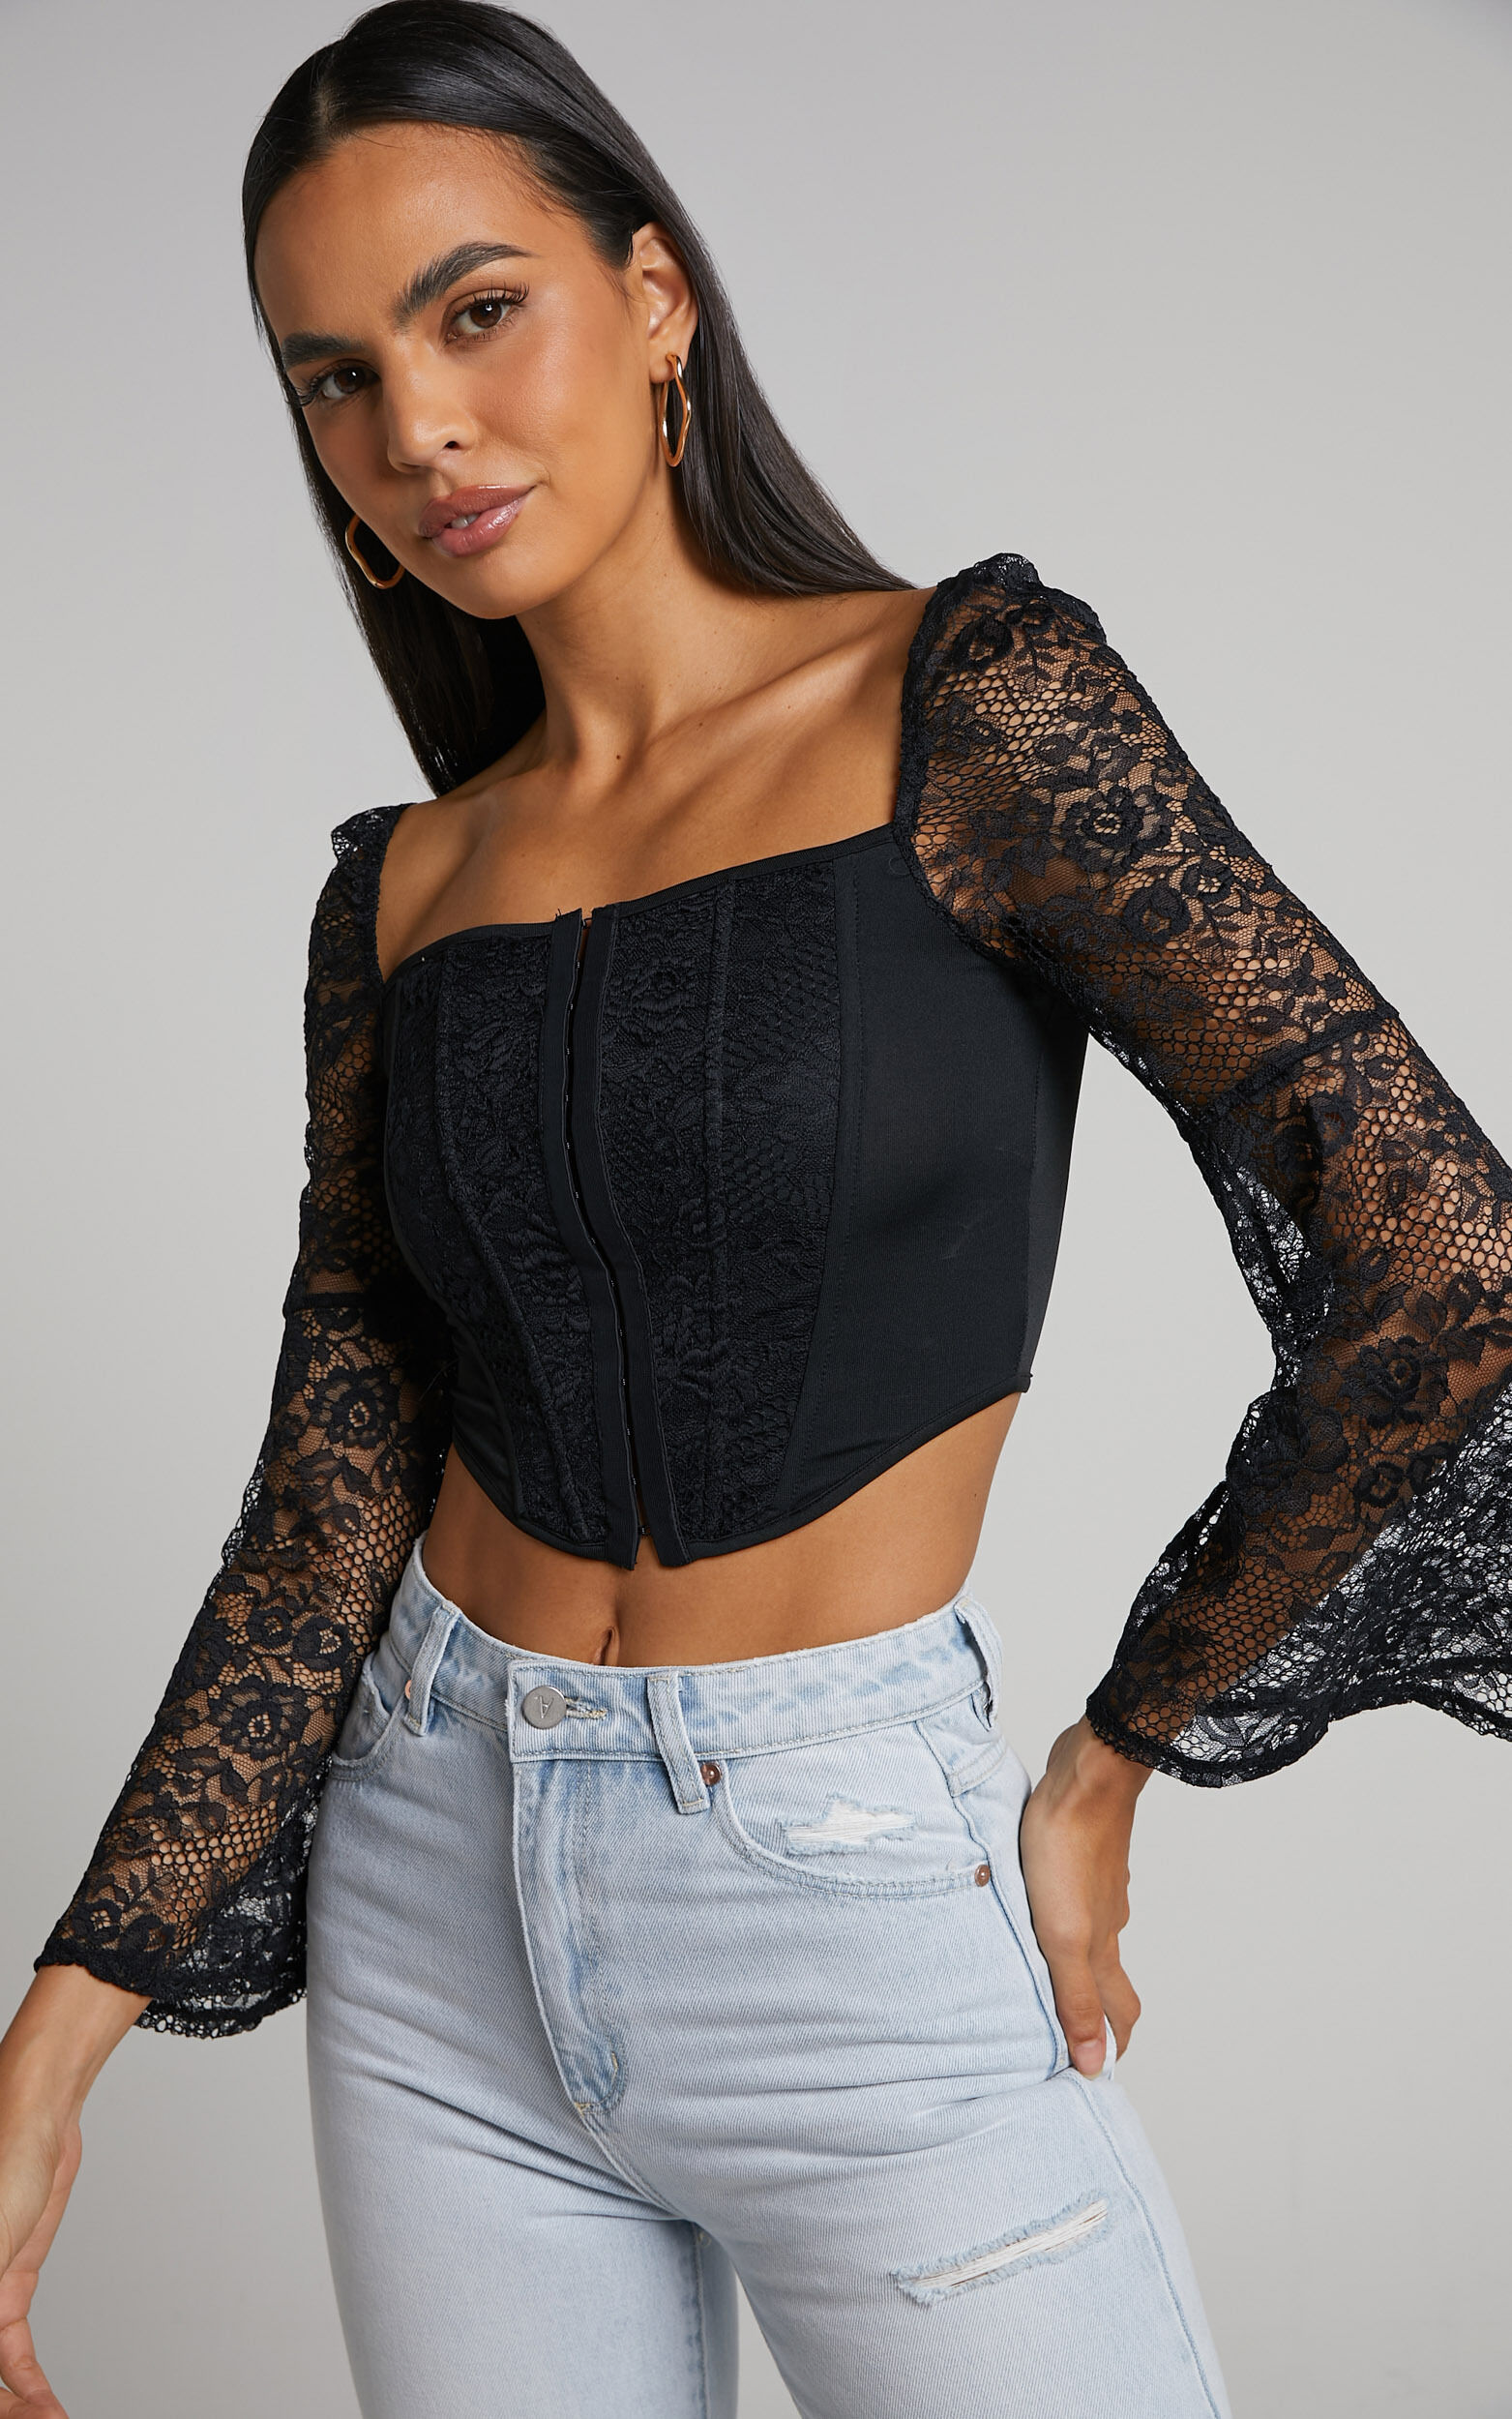 Black corset top with sleeves